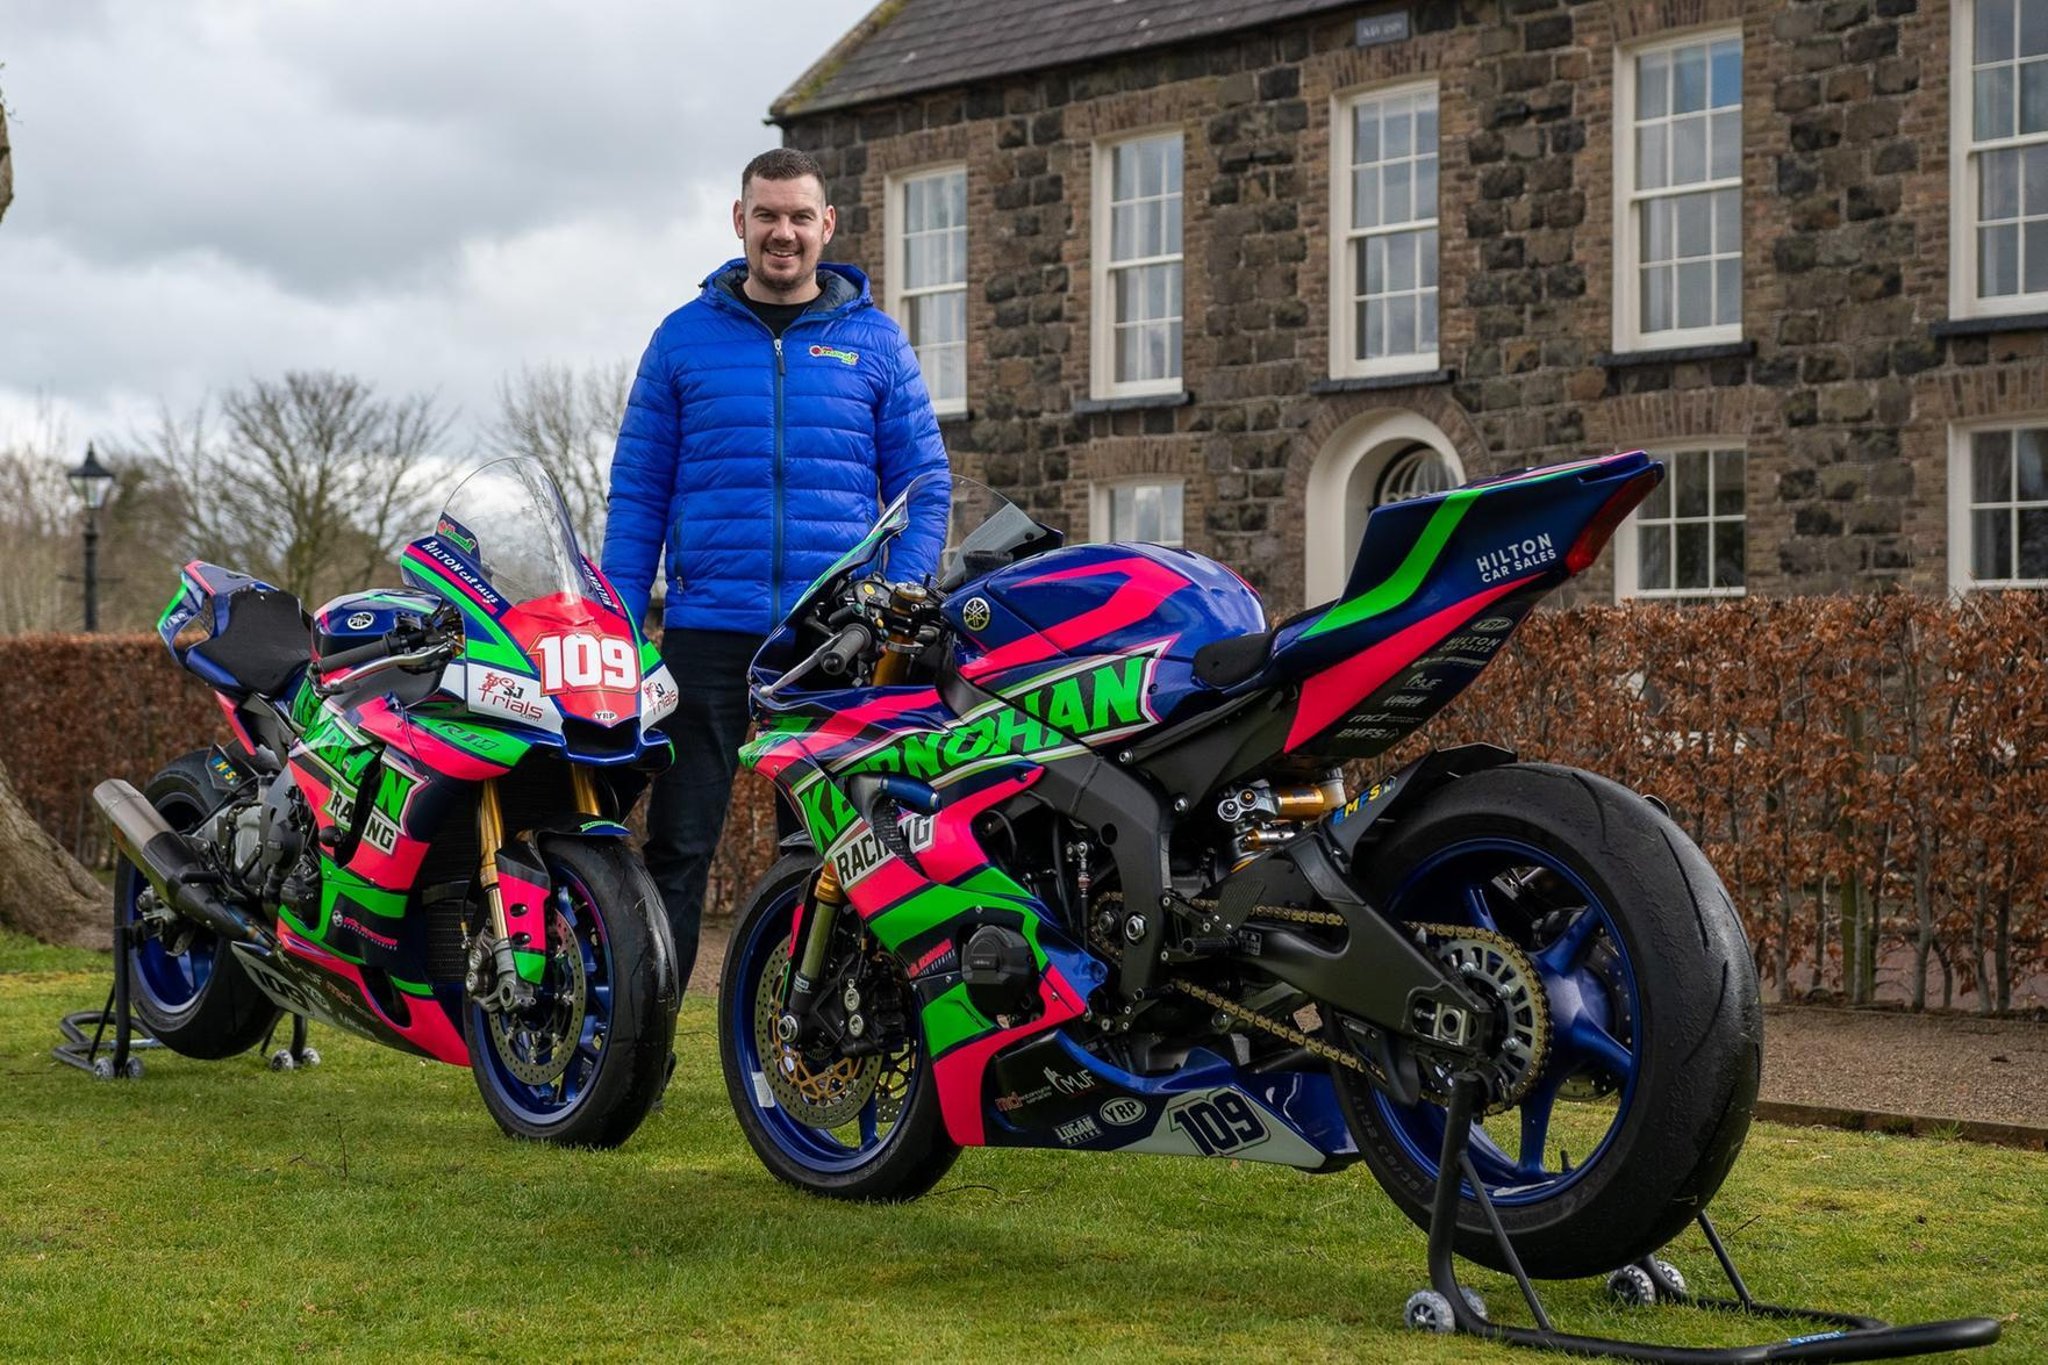 Neil Kernohan on comeback trail after suffering broken neck in Armoy crash